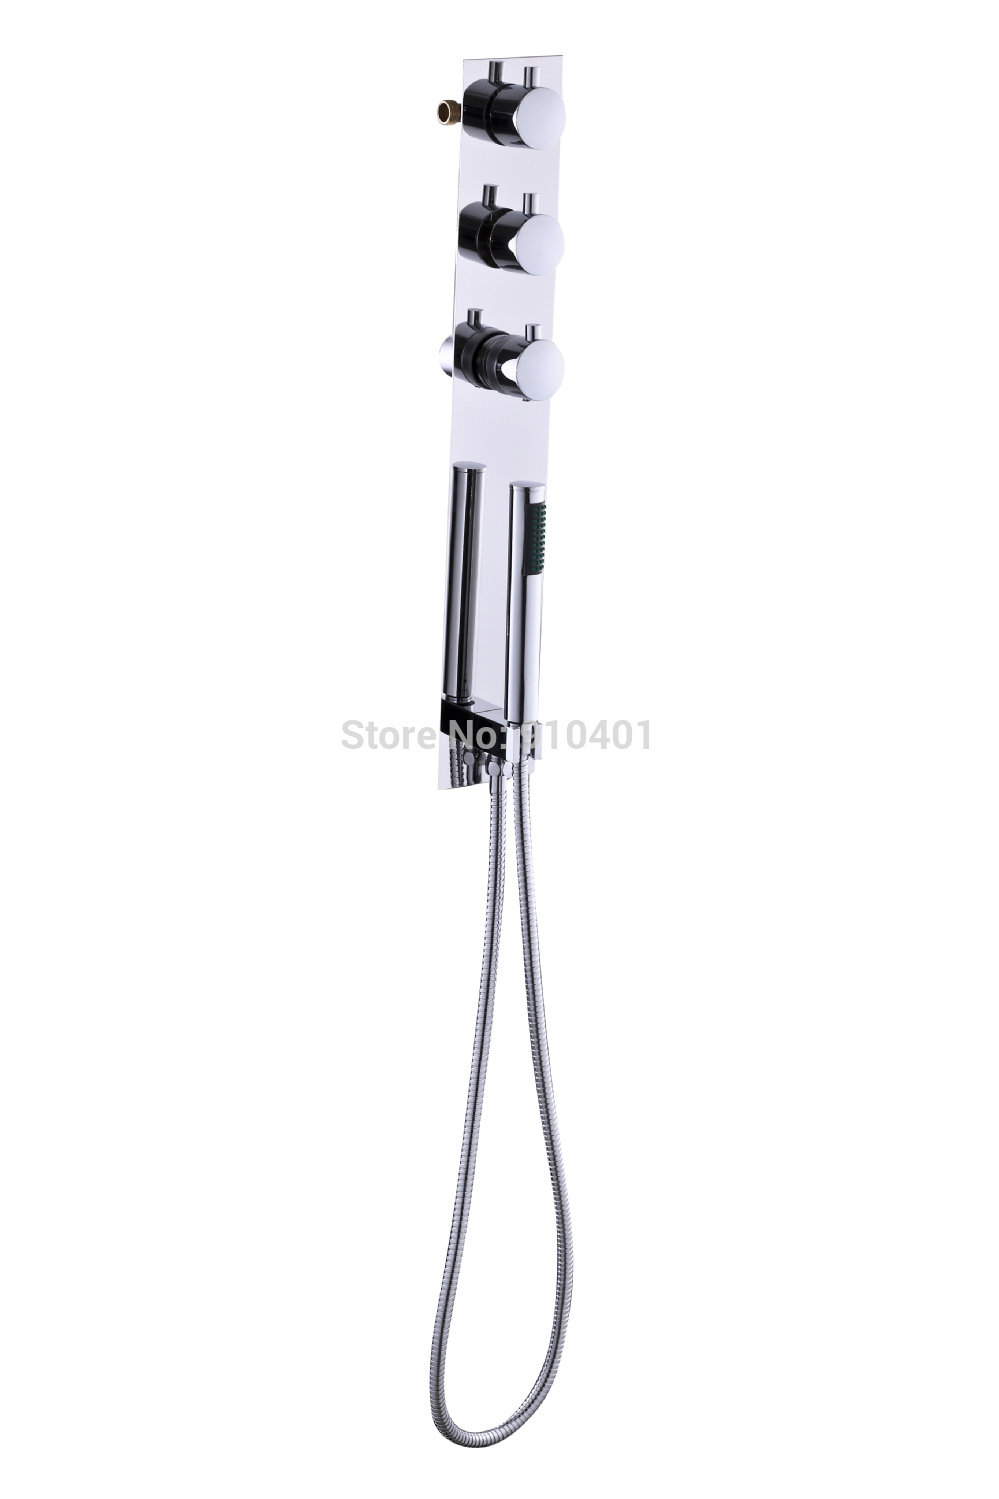 Wholesale And Retail Promotion LED Color Changing Thermostatic 8" Round Rain Shower Faucet Tub Mixer Tap Chrome